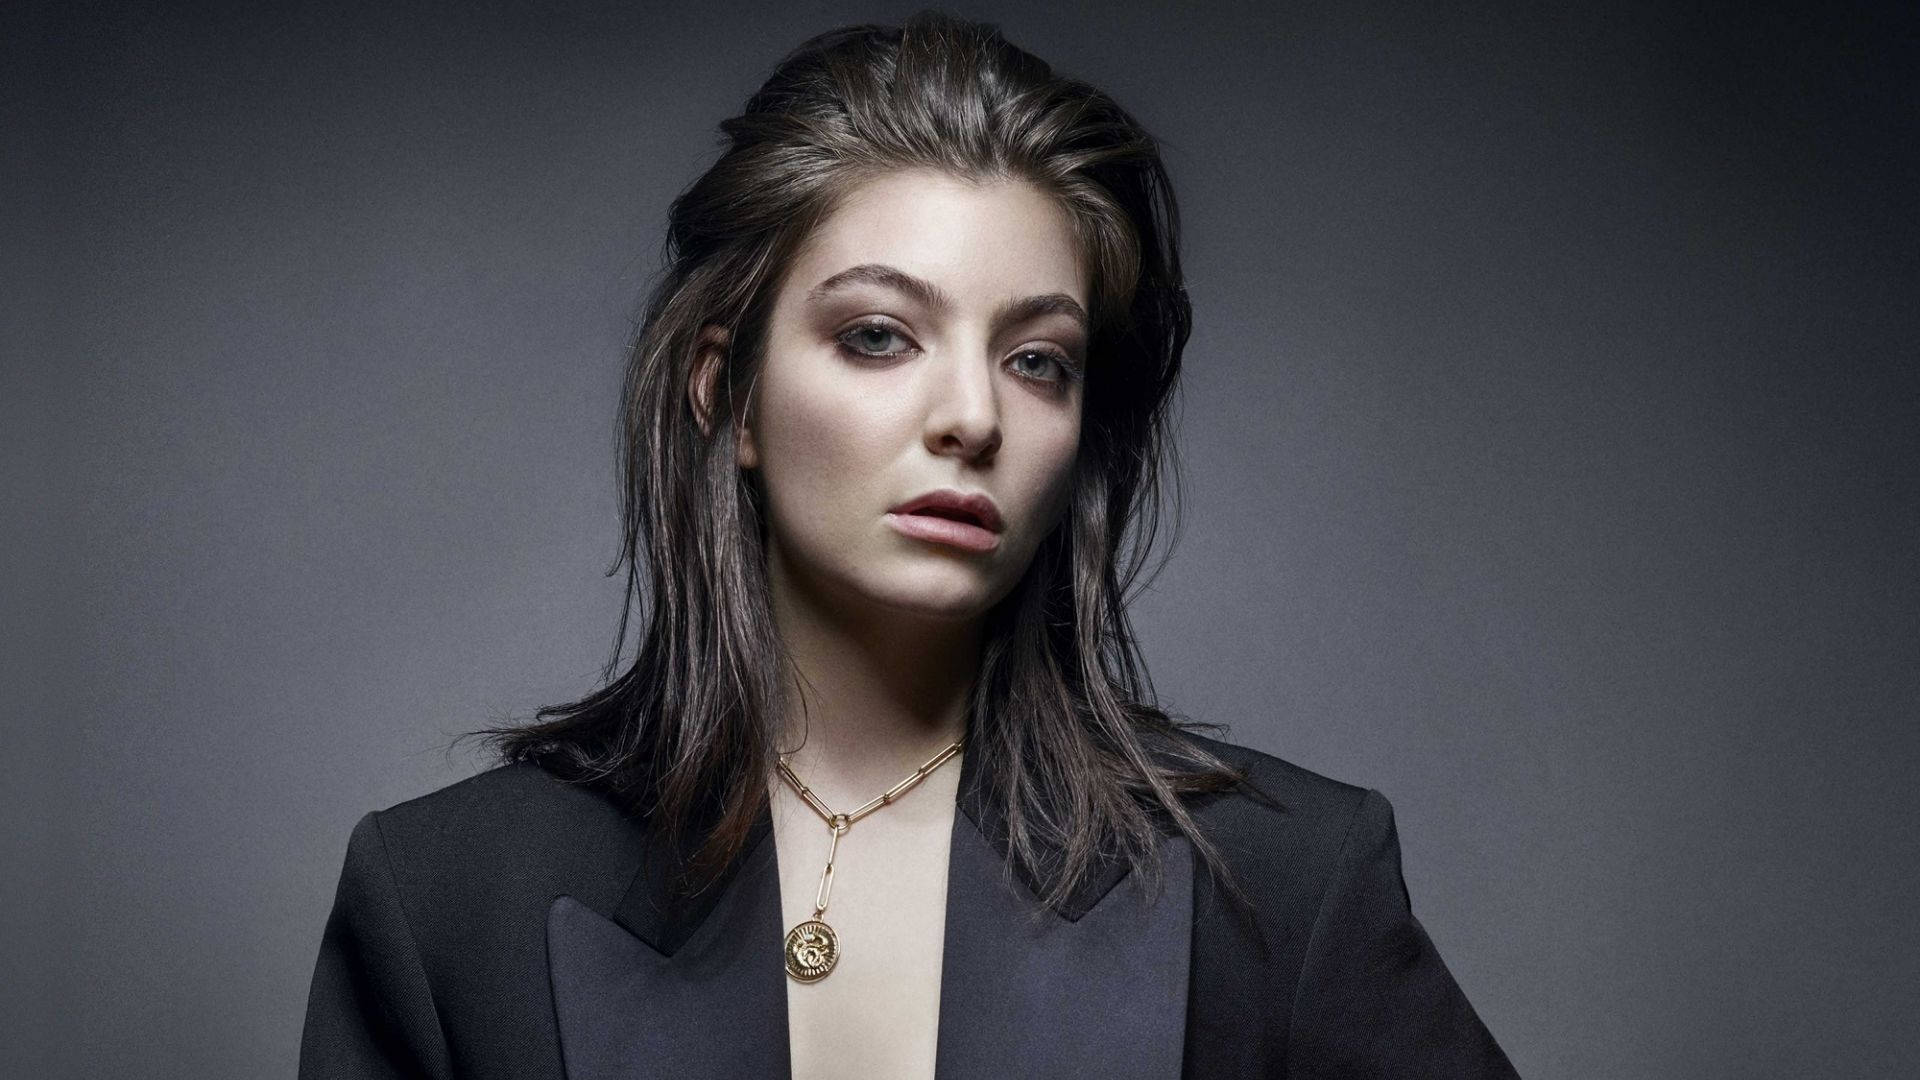 Lorde In Black Suit Background